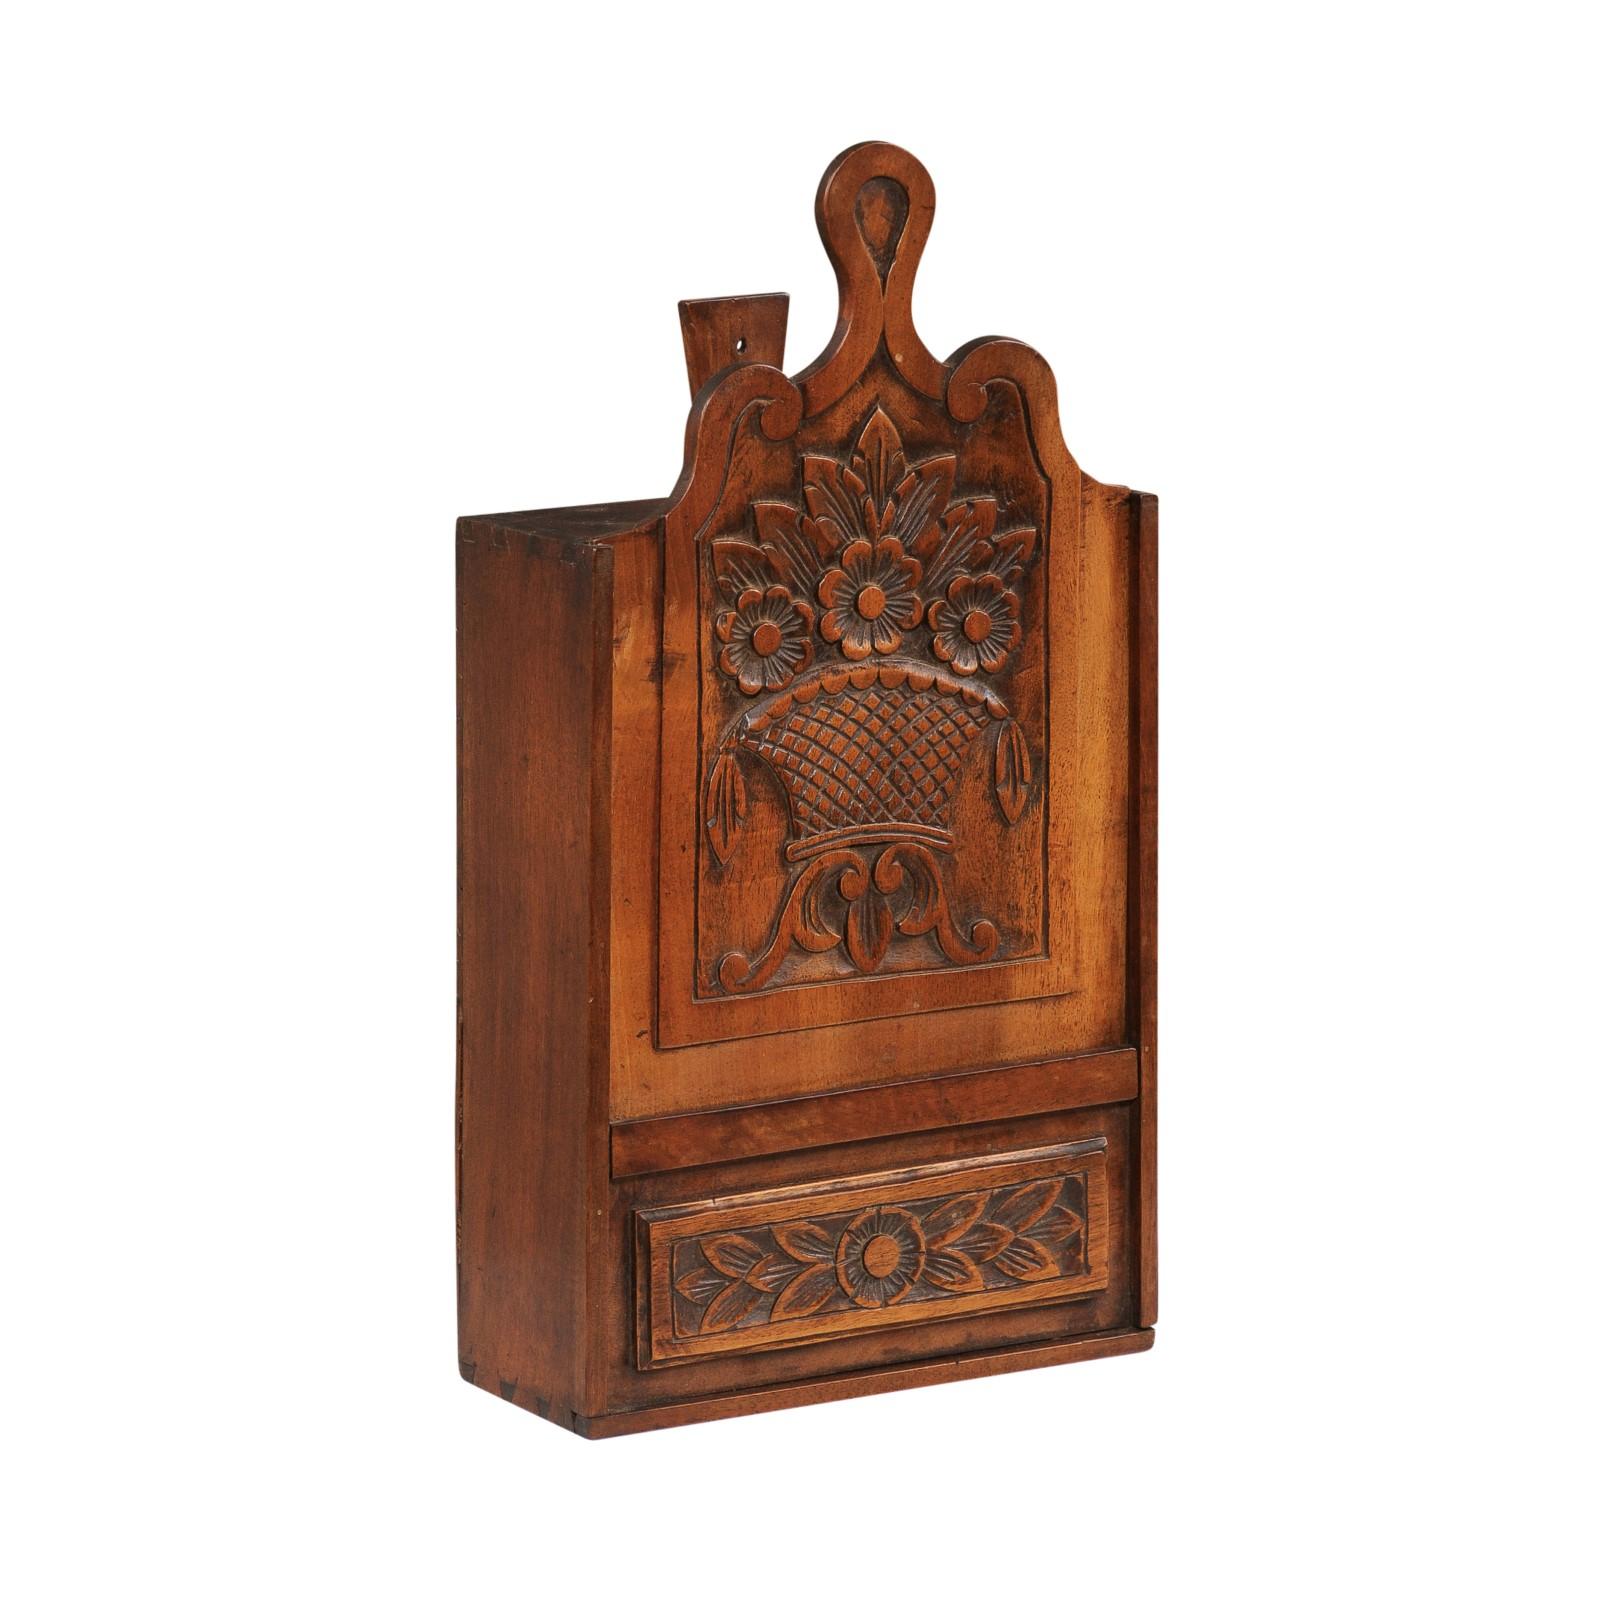 A French wooden farinerio decorative box from the late 19th century with carved floral motifs on sliding door. Created in France during the last quarter of the 19th century, this petite box, called a fariniero, was intended to be used to coat fish,